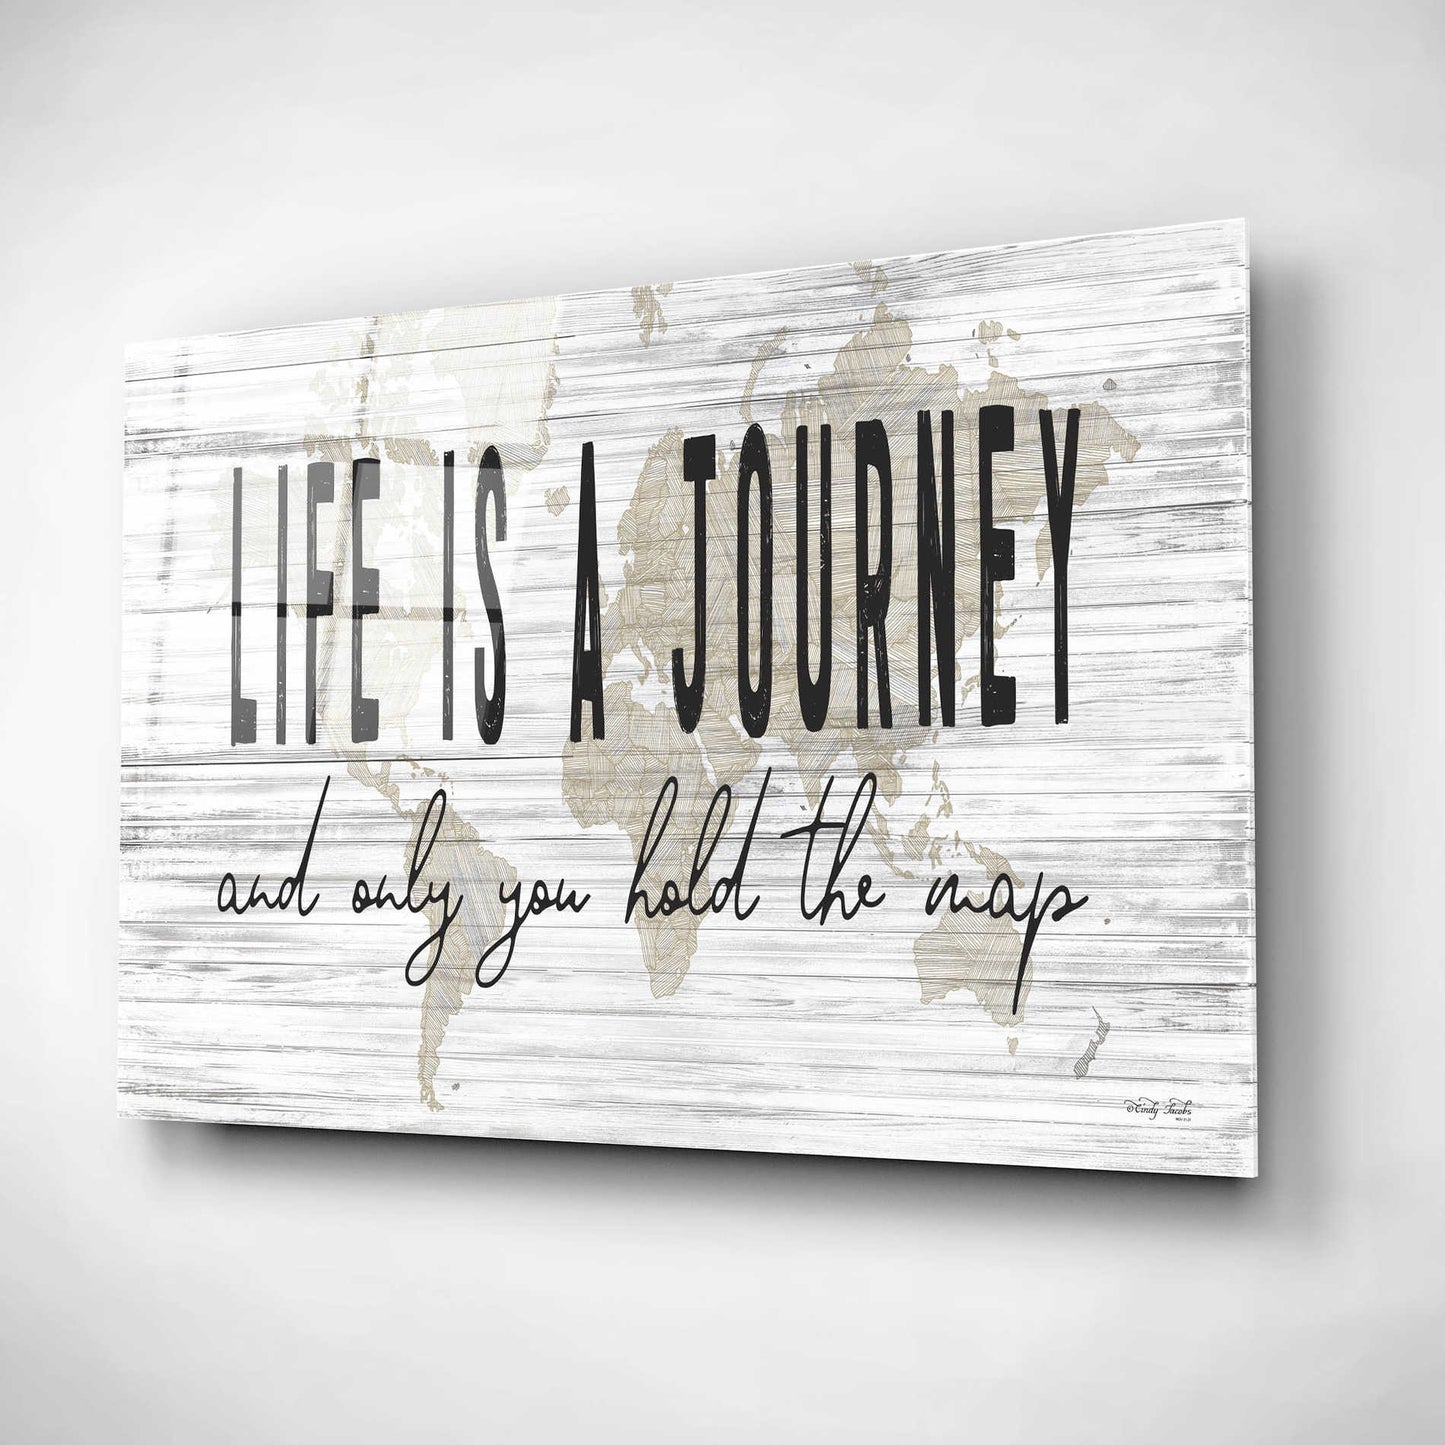 Epic Art 'Life is a Journey' by Cindy Jacobs, Acrylic Glass Wall Art,24x16